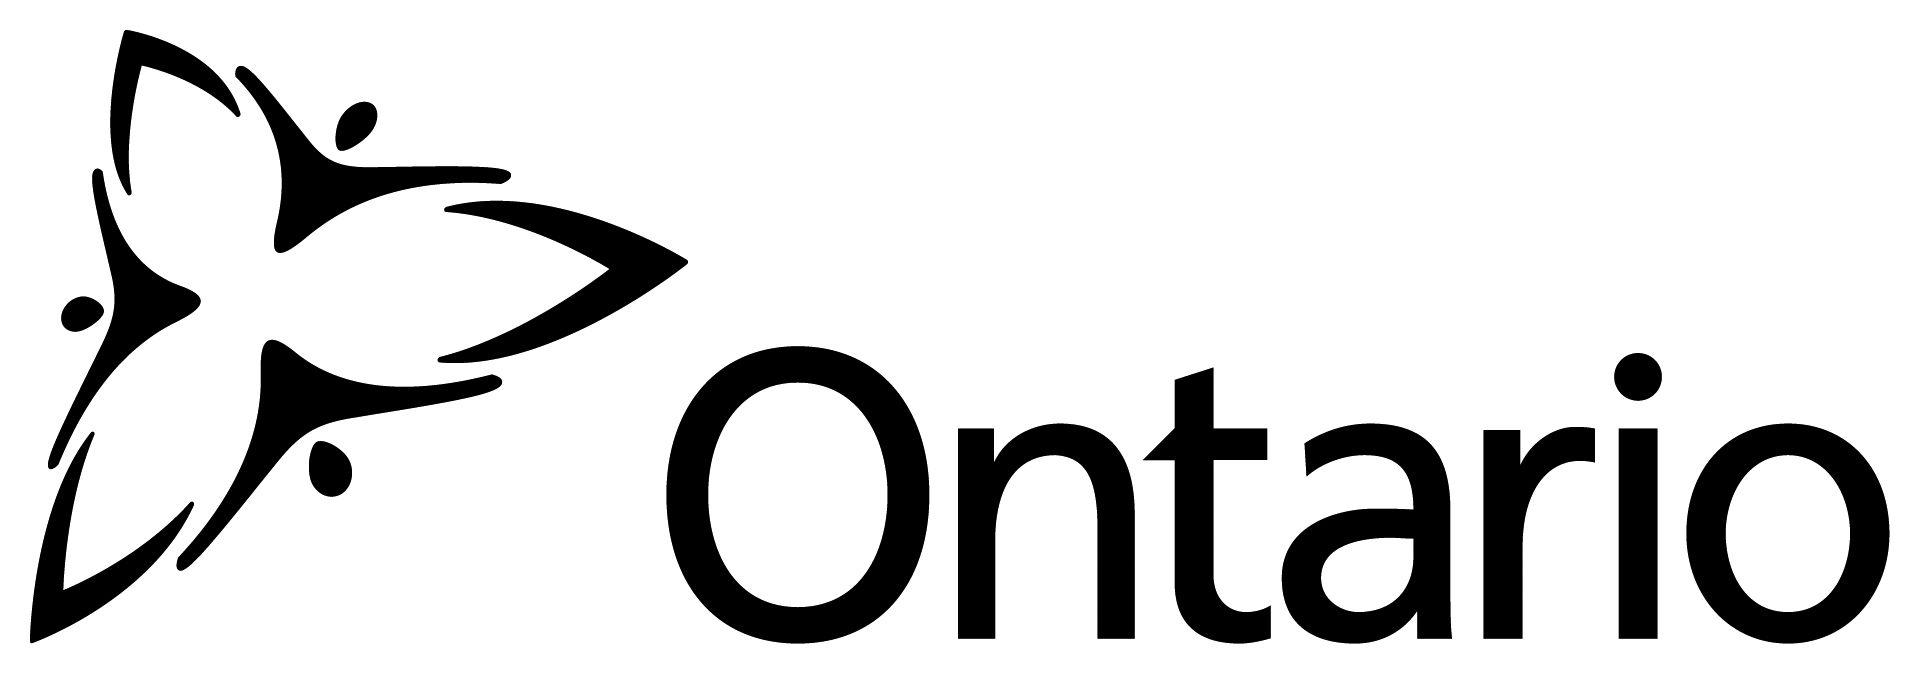 3 People Logo - Ontario's trillium logo looks like 3 people hangin' out in a hottub ...